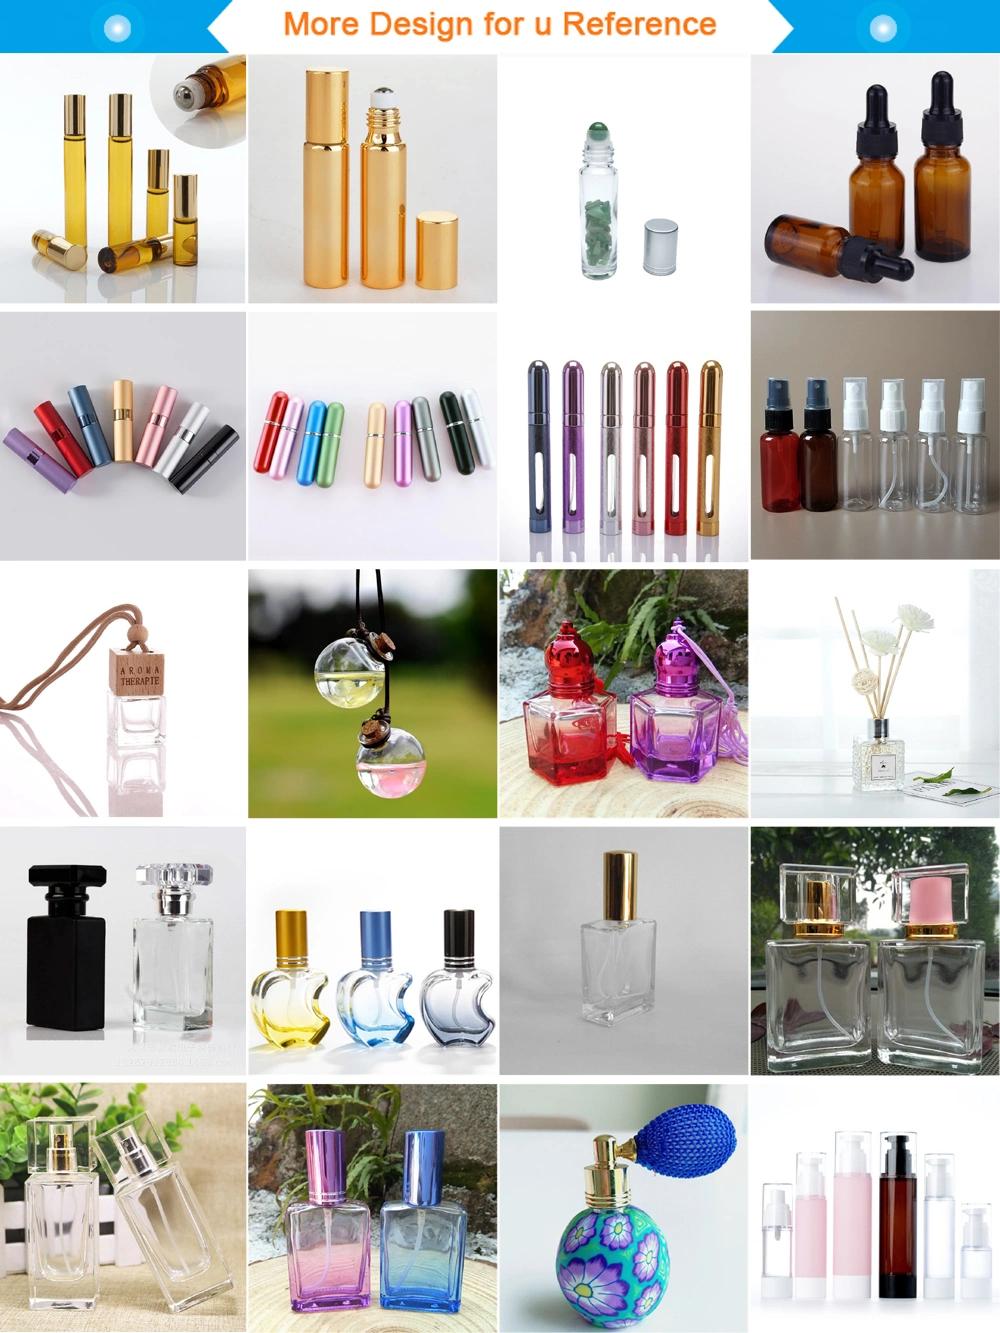 5ml Portable Mini Refillable Multicolor Perfume Bottle with Spray Scent Pump Empty Cosmetic Containers Atomizer Bottle for Travel Tool